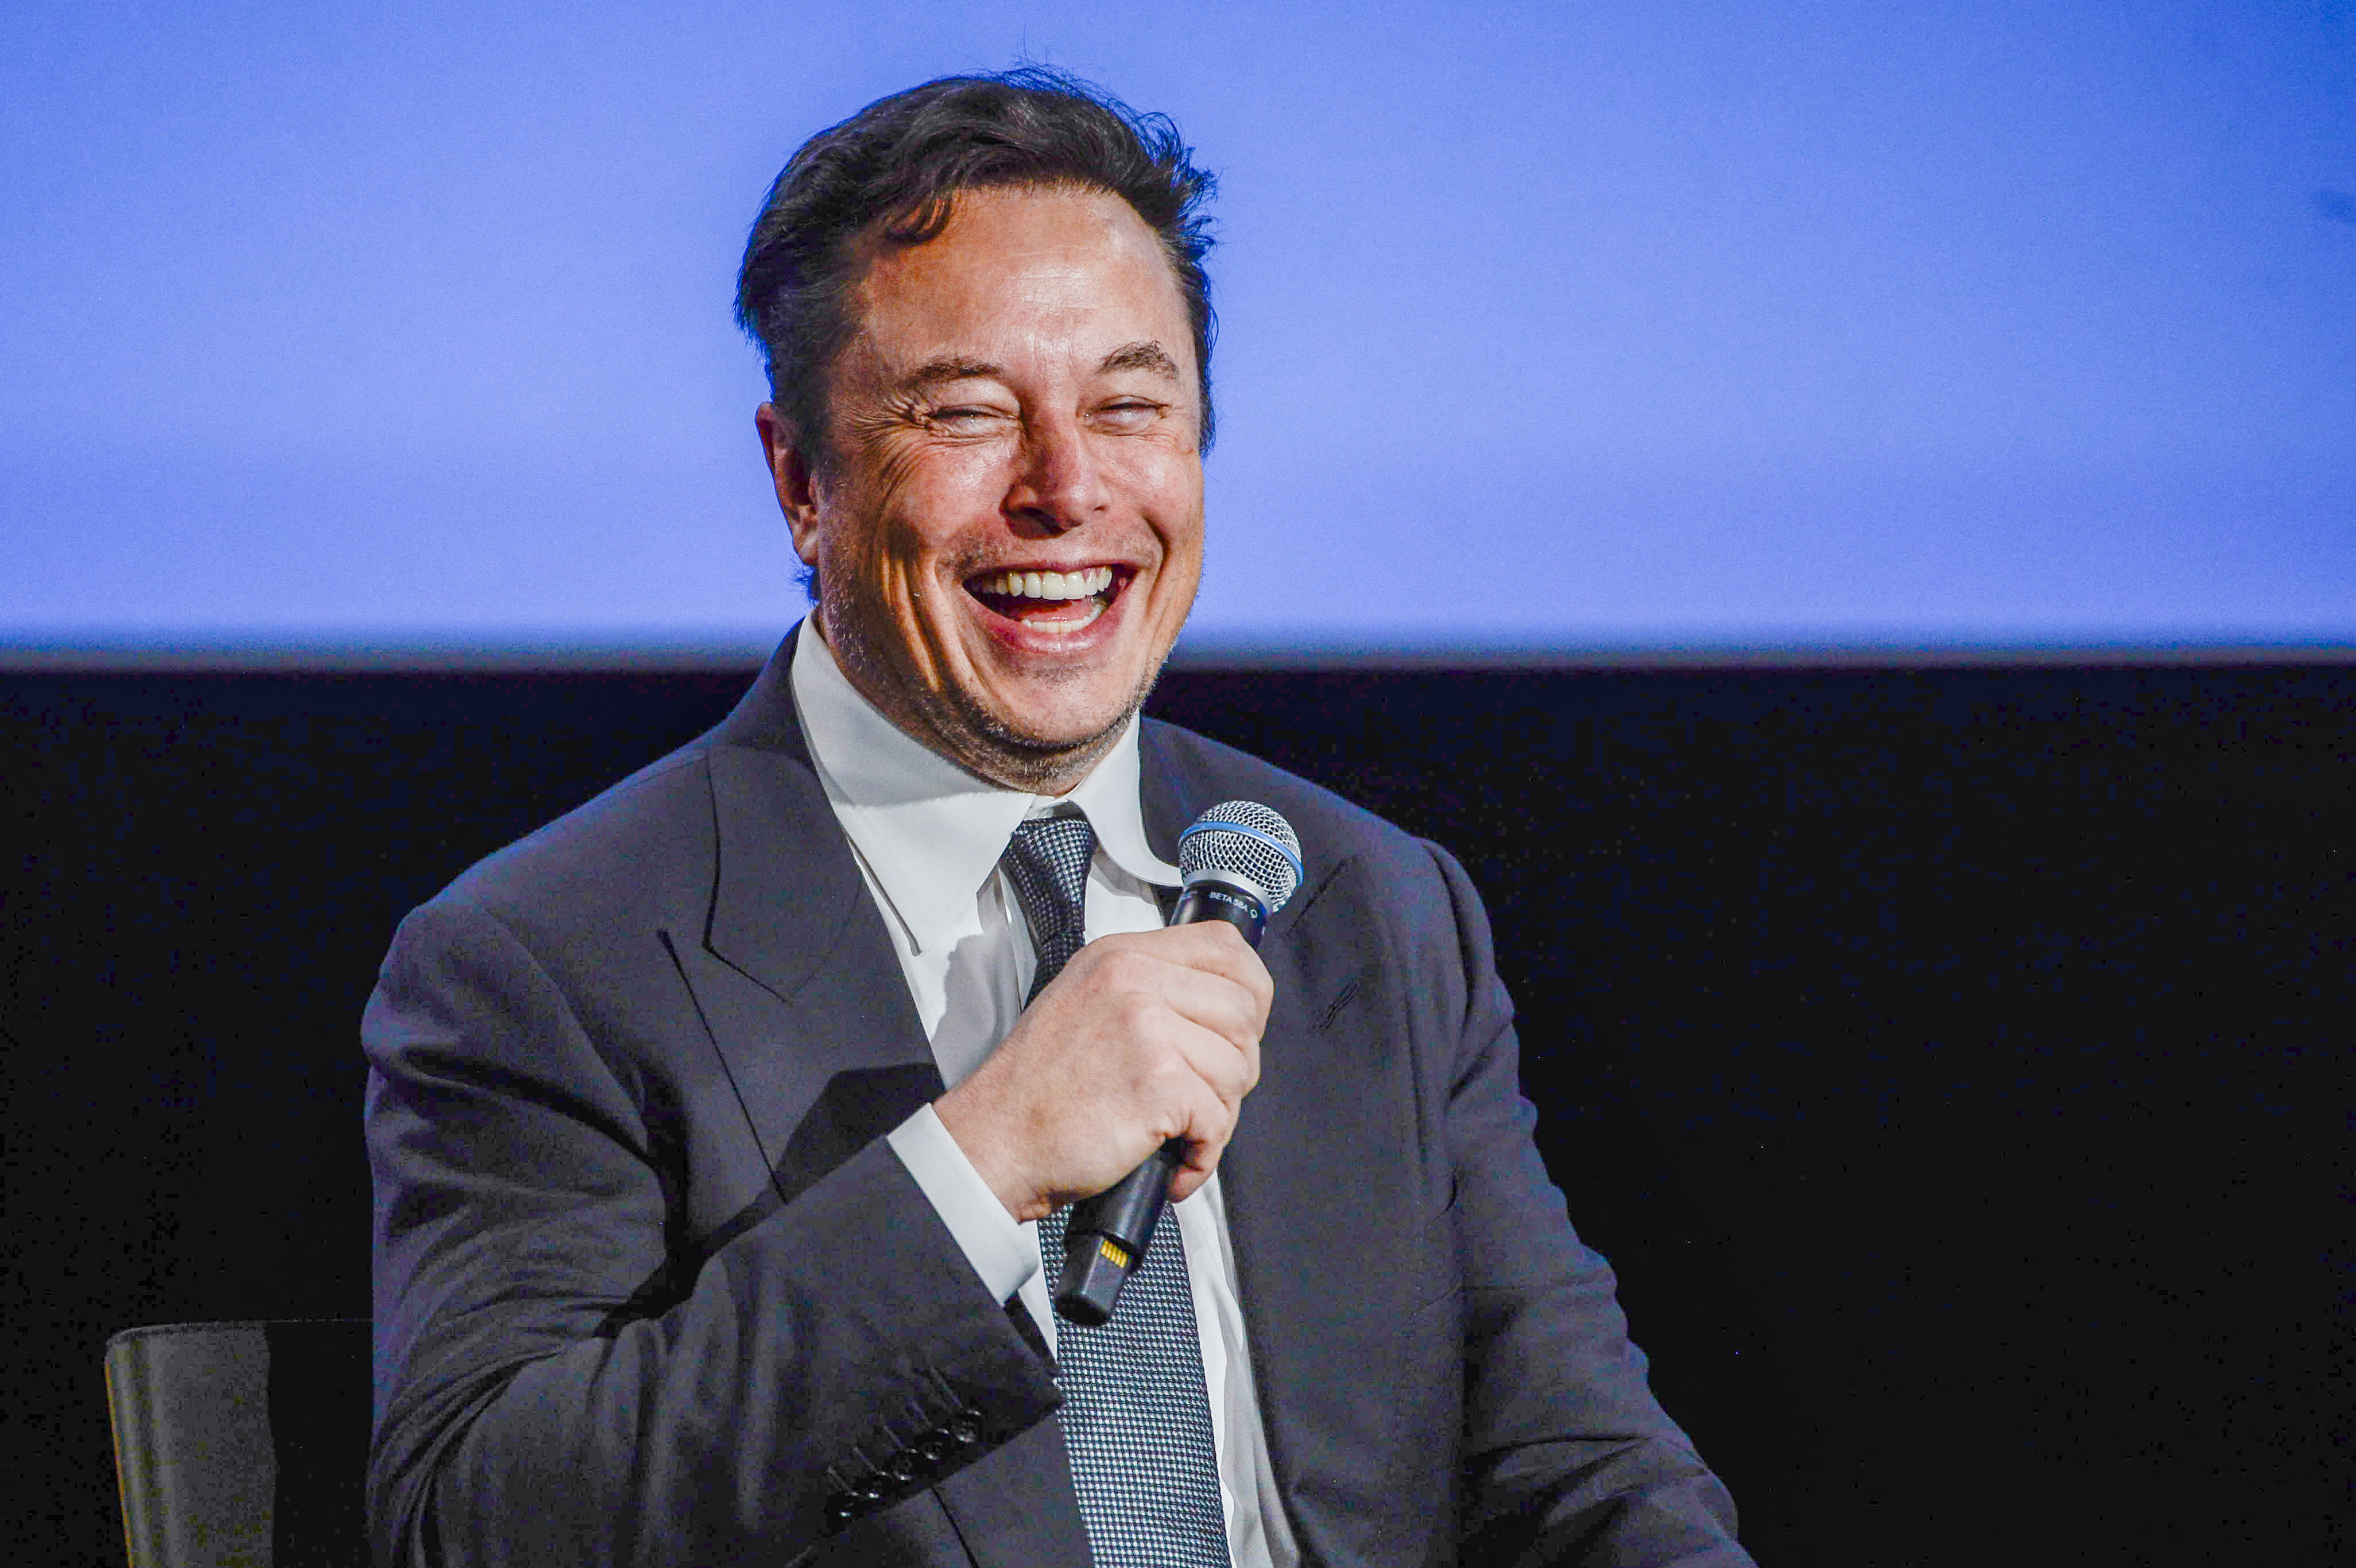 Elon Musk lights blaze of speculation over gonzo share buyback a week before Tesla Q3 earnings